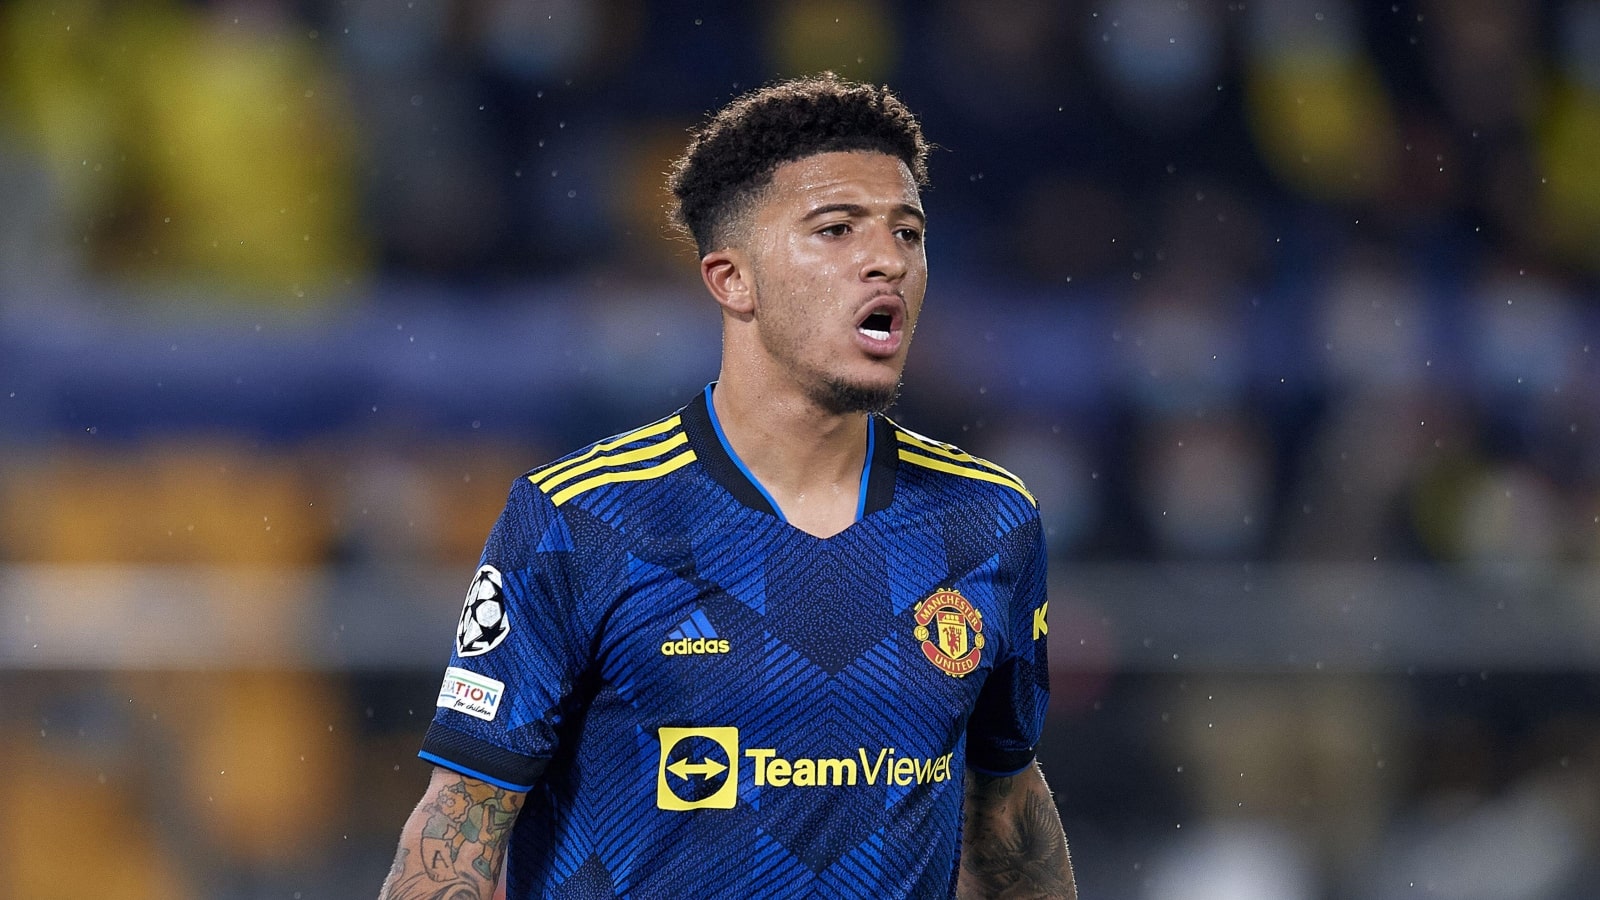 jadon-sancho-in-action-for-man-utd-during-champions-league-group-match